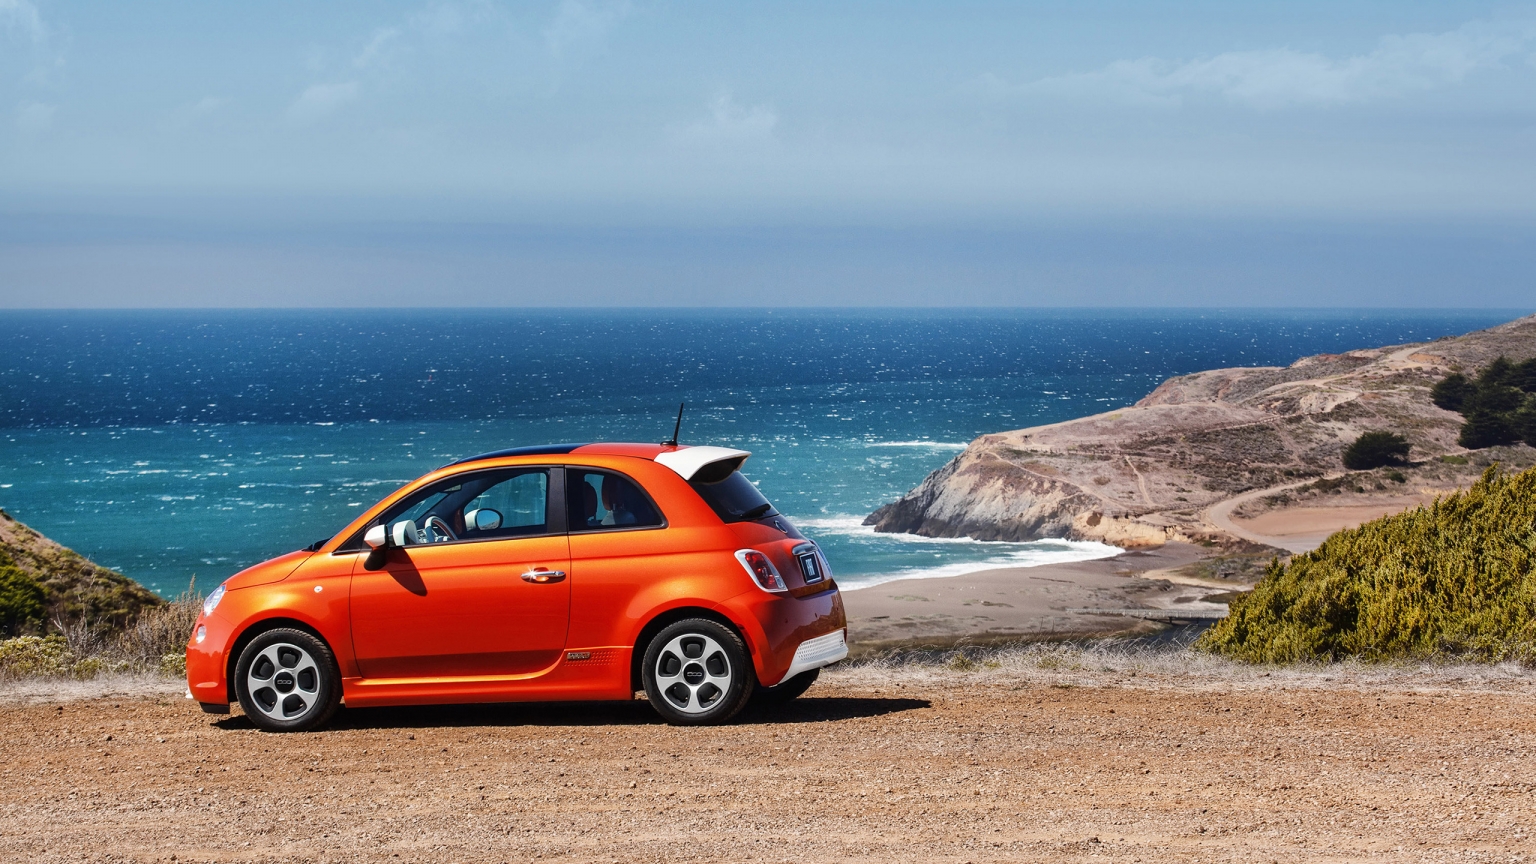 Fiat 500 at Sea for 1536 x 864 HDTV resolution